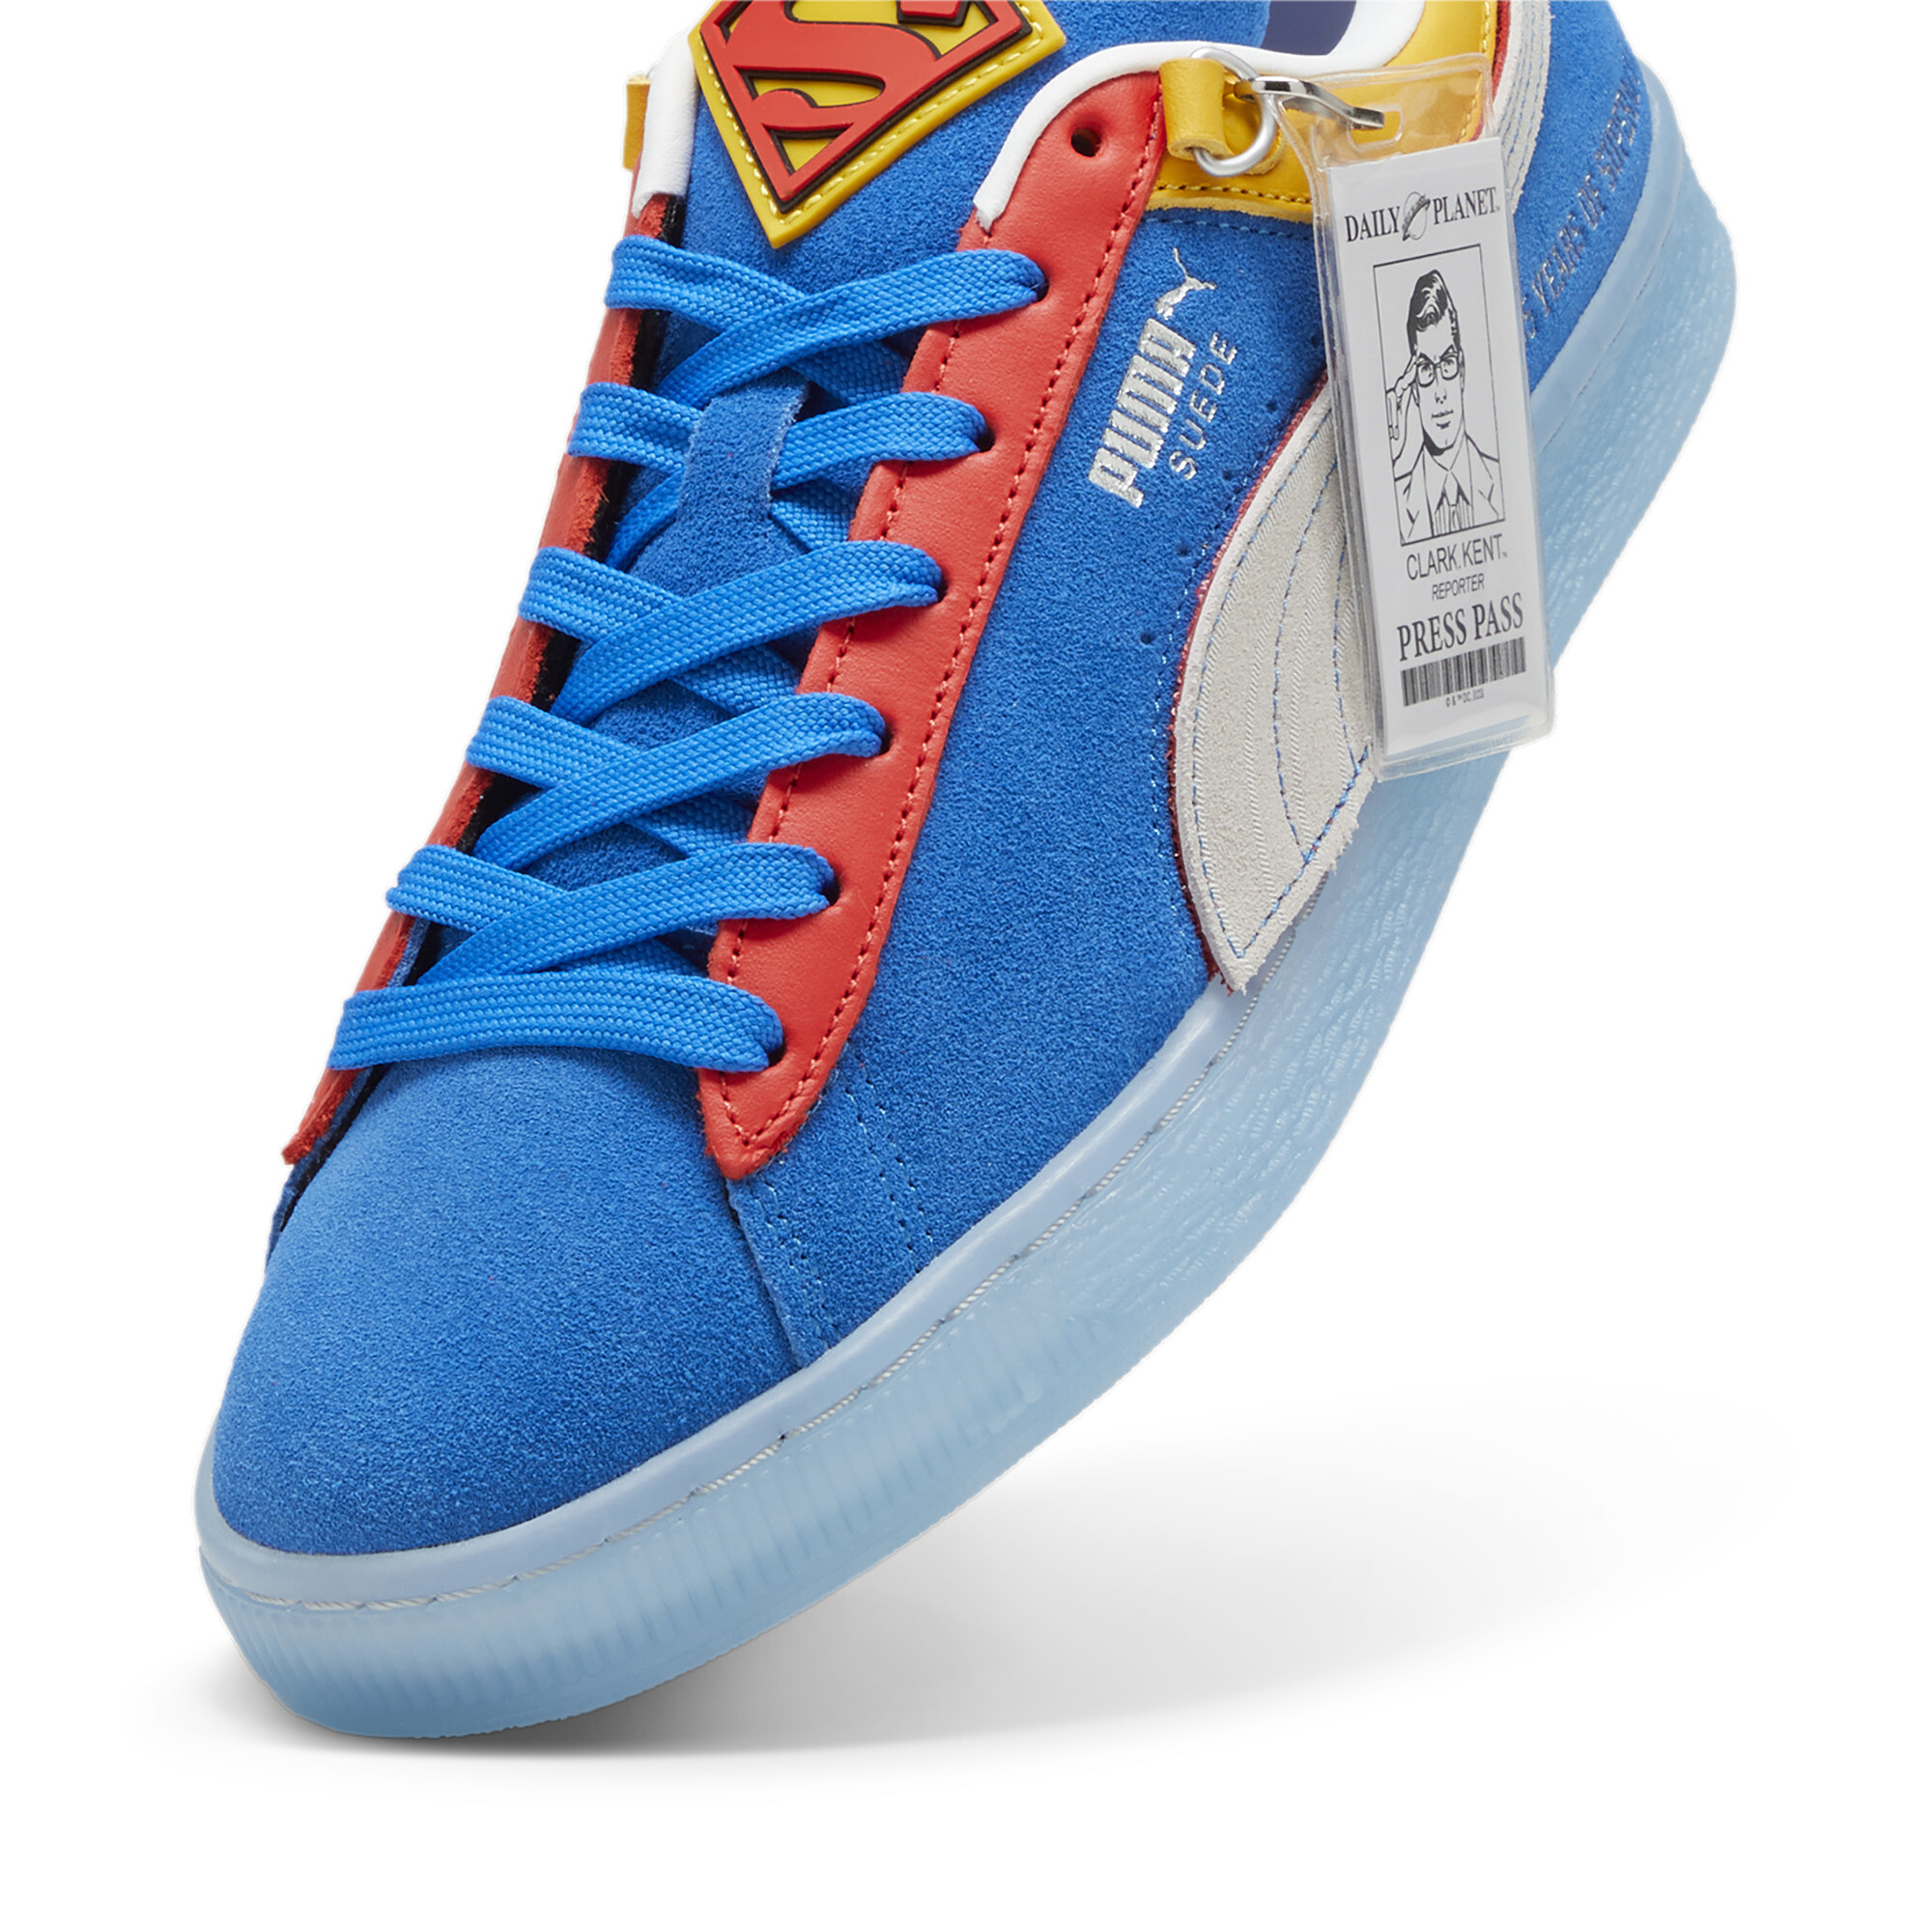 Puma X SUPERMAN 85th Anniversary Suede Sneakers, Blue, Size 38, Shoes